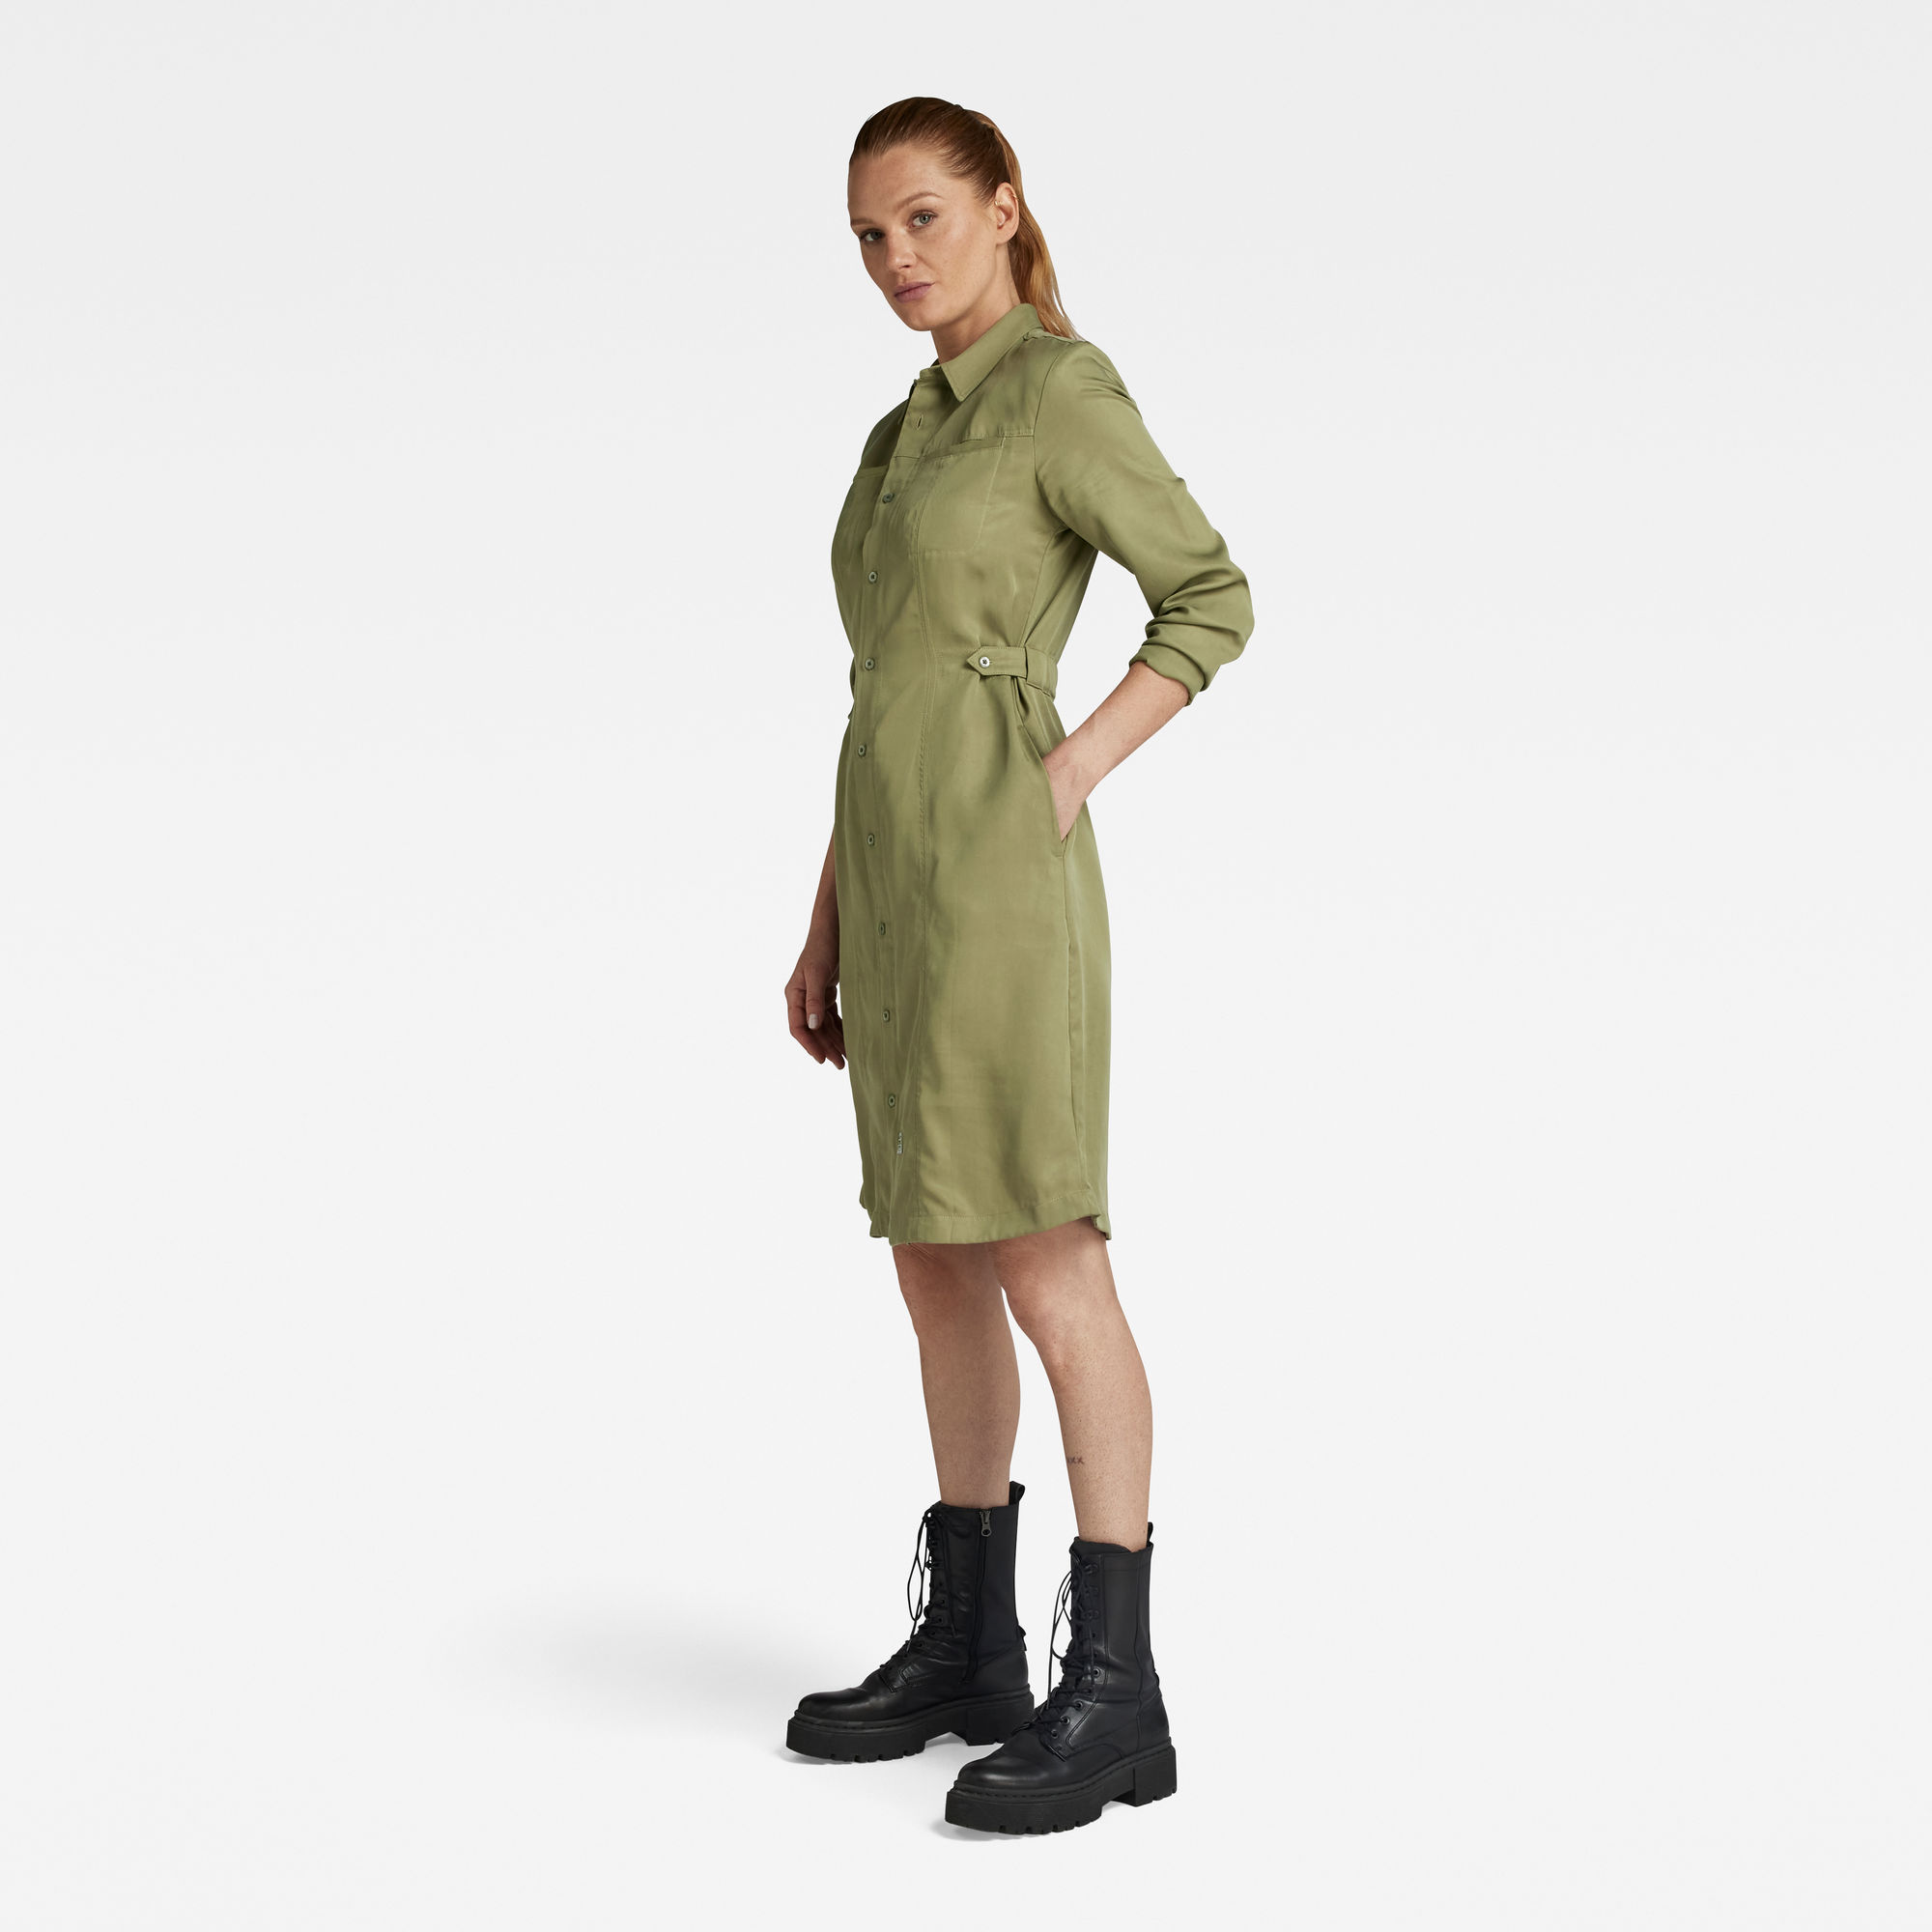 G-Star RAW Fitted Blousejurk Groen Dames